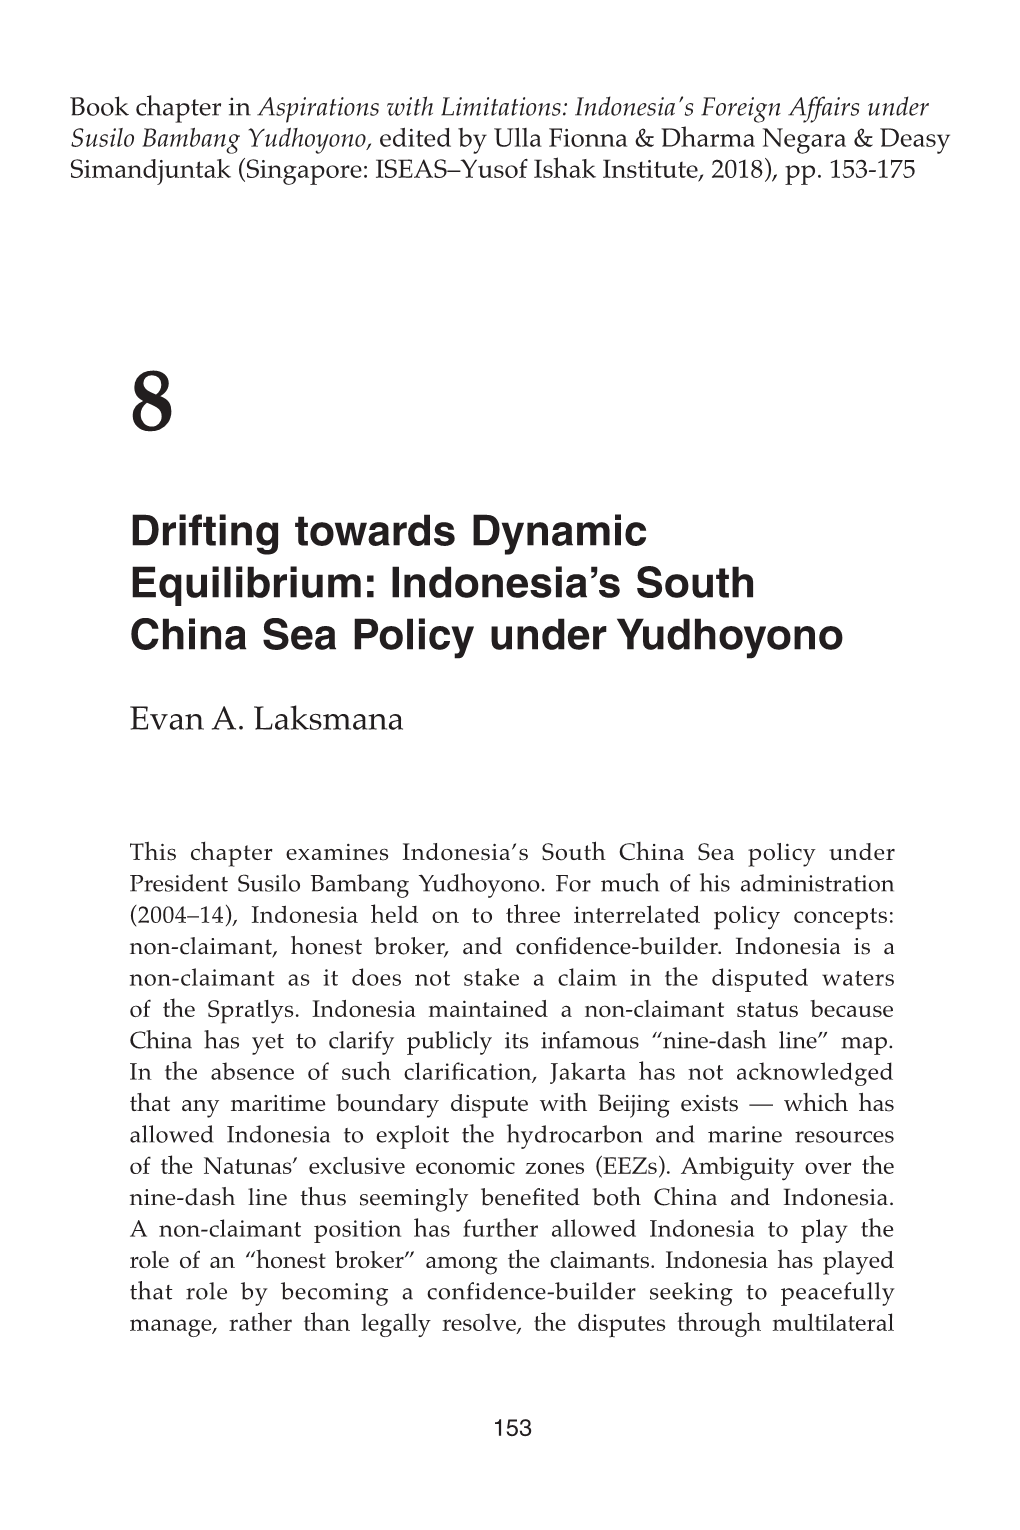 Drifting Towards Dynamic Equilibrium: Indonesia's South China Sea Policy